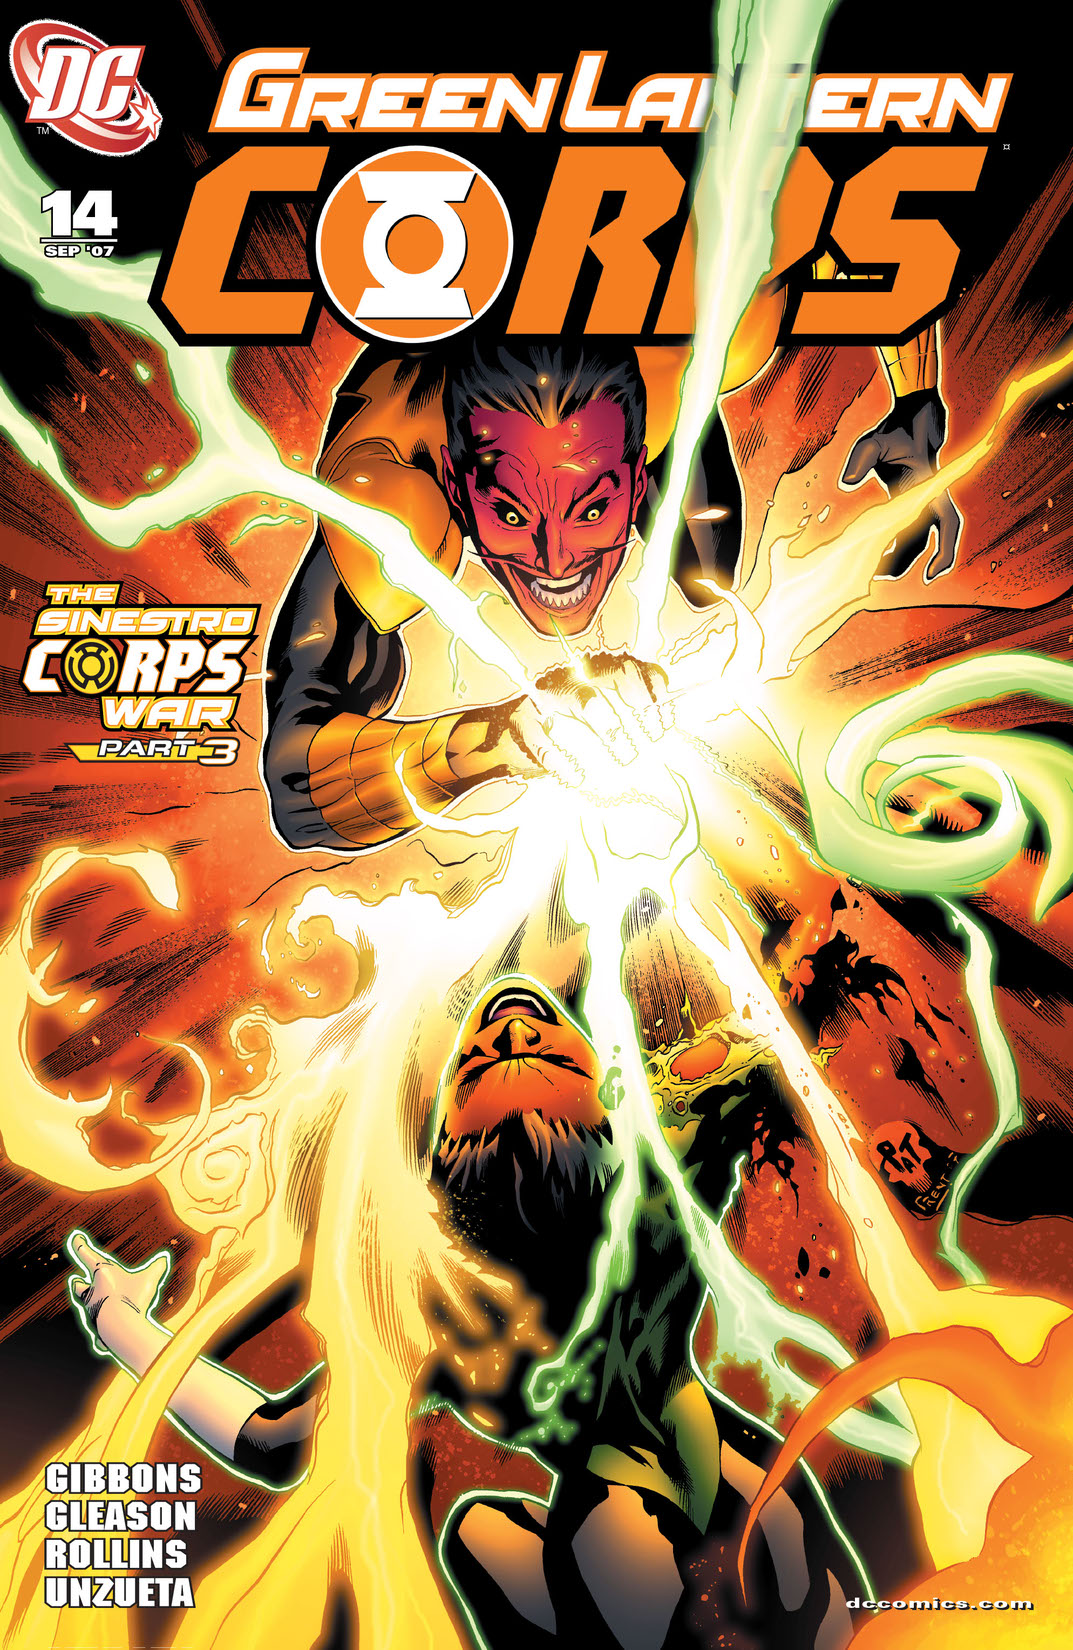 Green Lantern Corps (2006-) #14 preview images